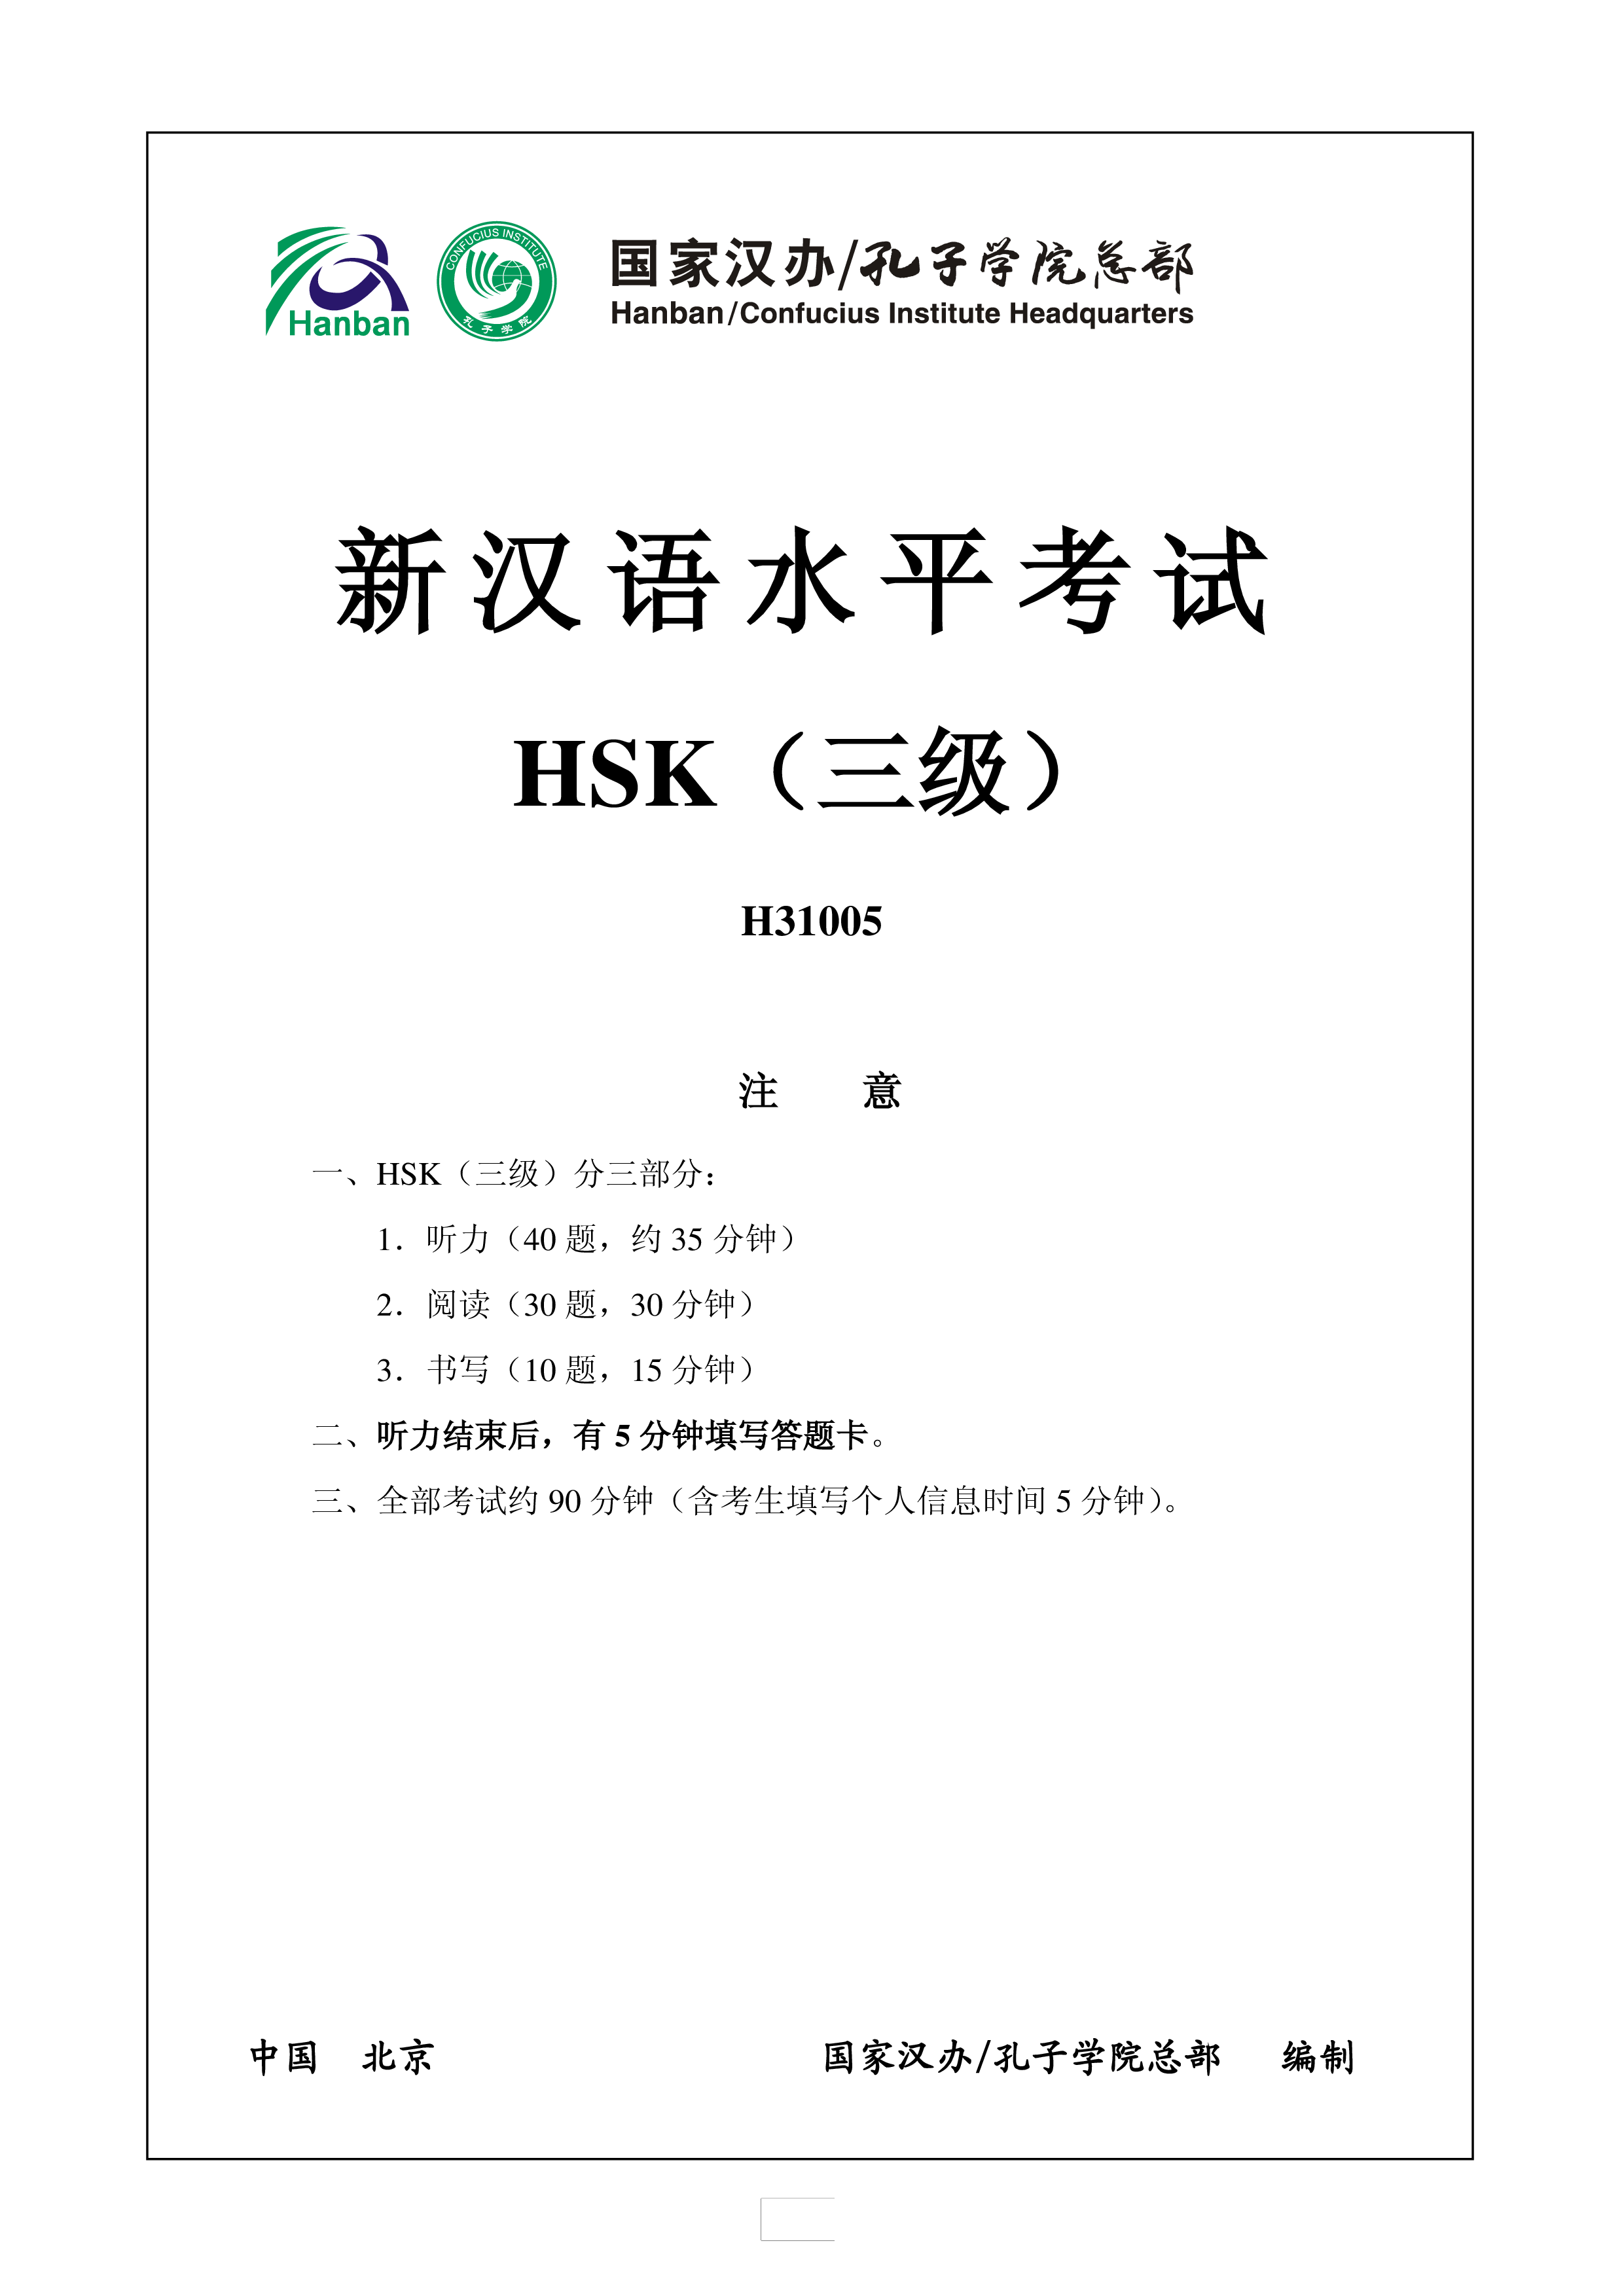 hsk3 chinese exam including answers # hsk3 h31005 plantilla imagen principal